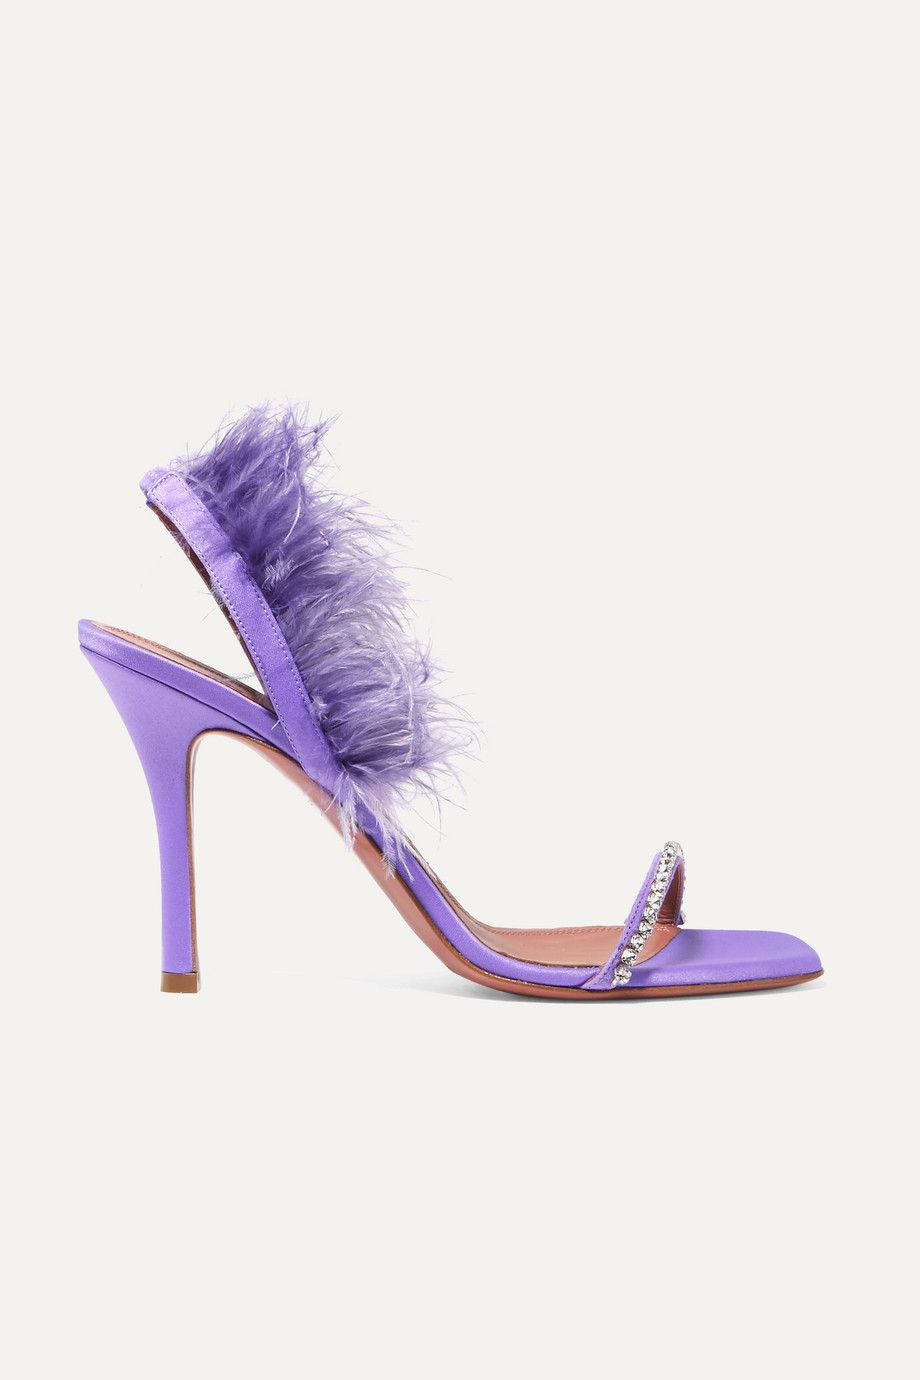 feathers fashion - feather shoes